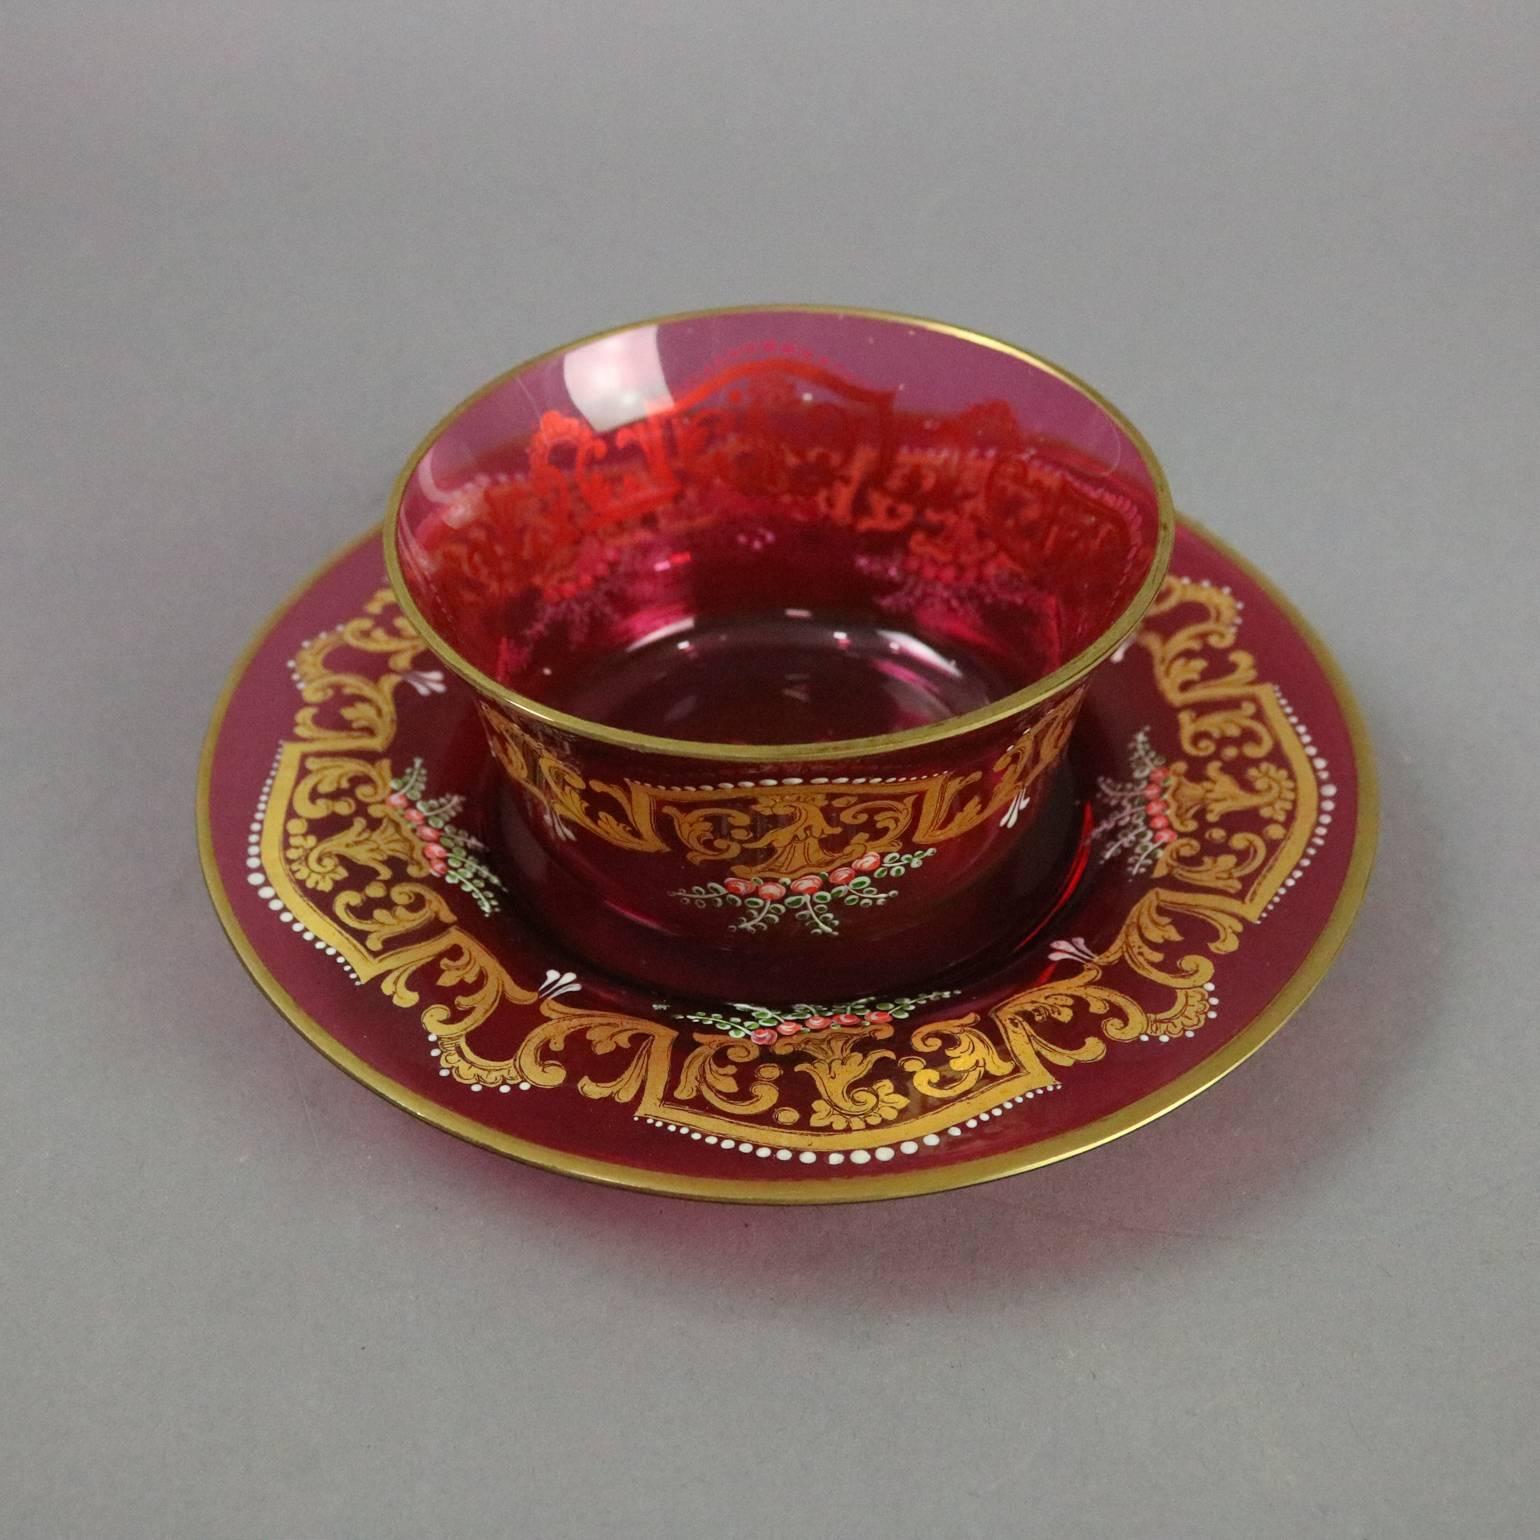 Set of three cranberry Moser glass finger bowls with saucers feature gilt and enameled Baroque graffito decoration, signature on bowls, circa 1850

Measures: 2.75